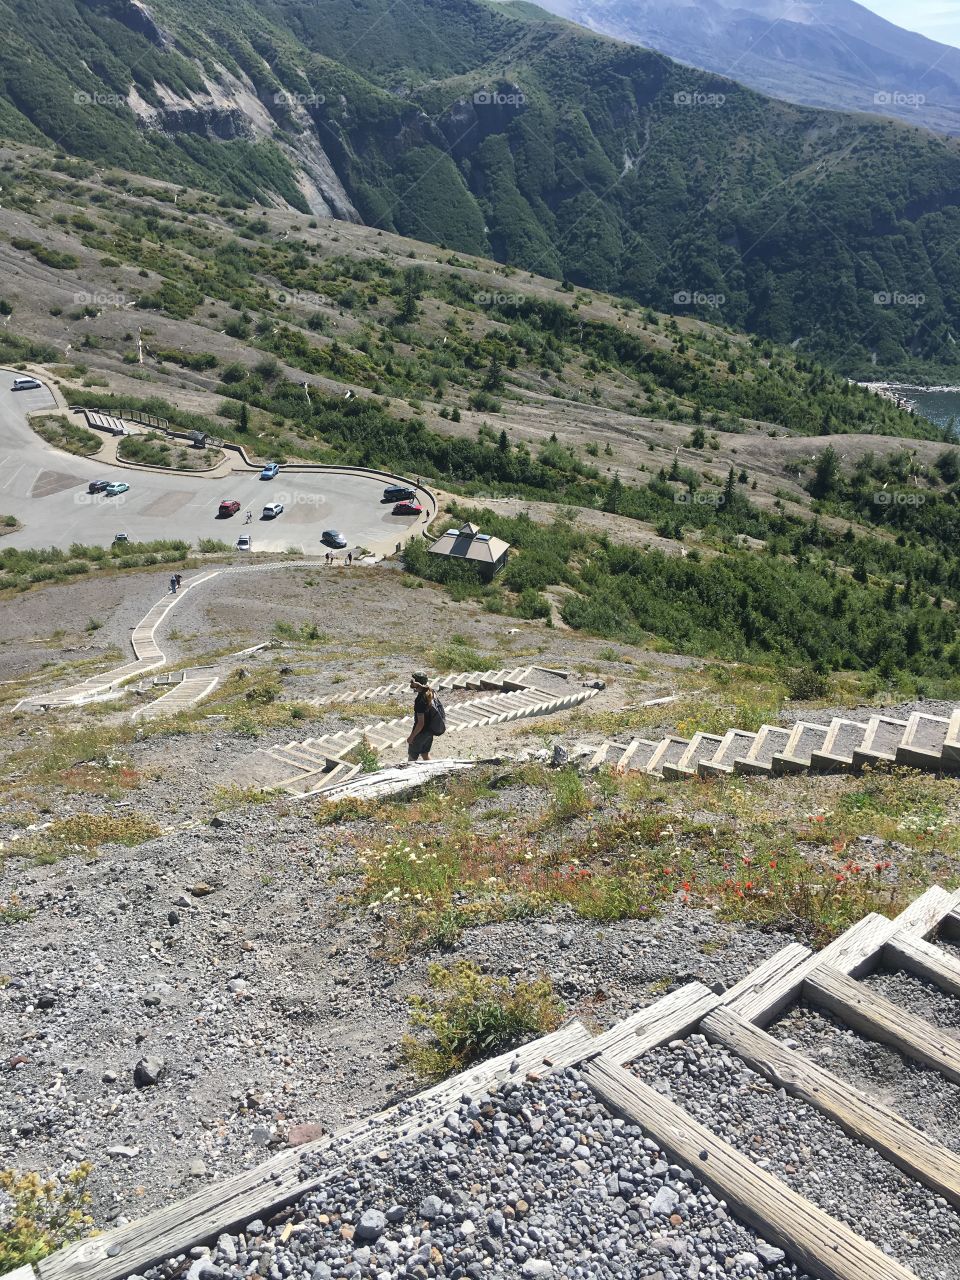 View of the steps leading up to a stunning outlook next to Mt. St. Helens